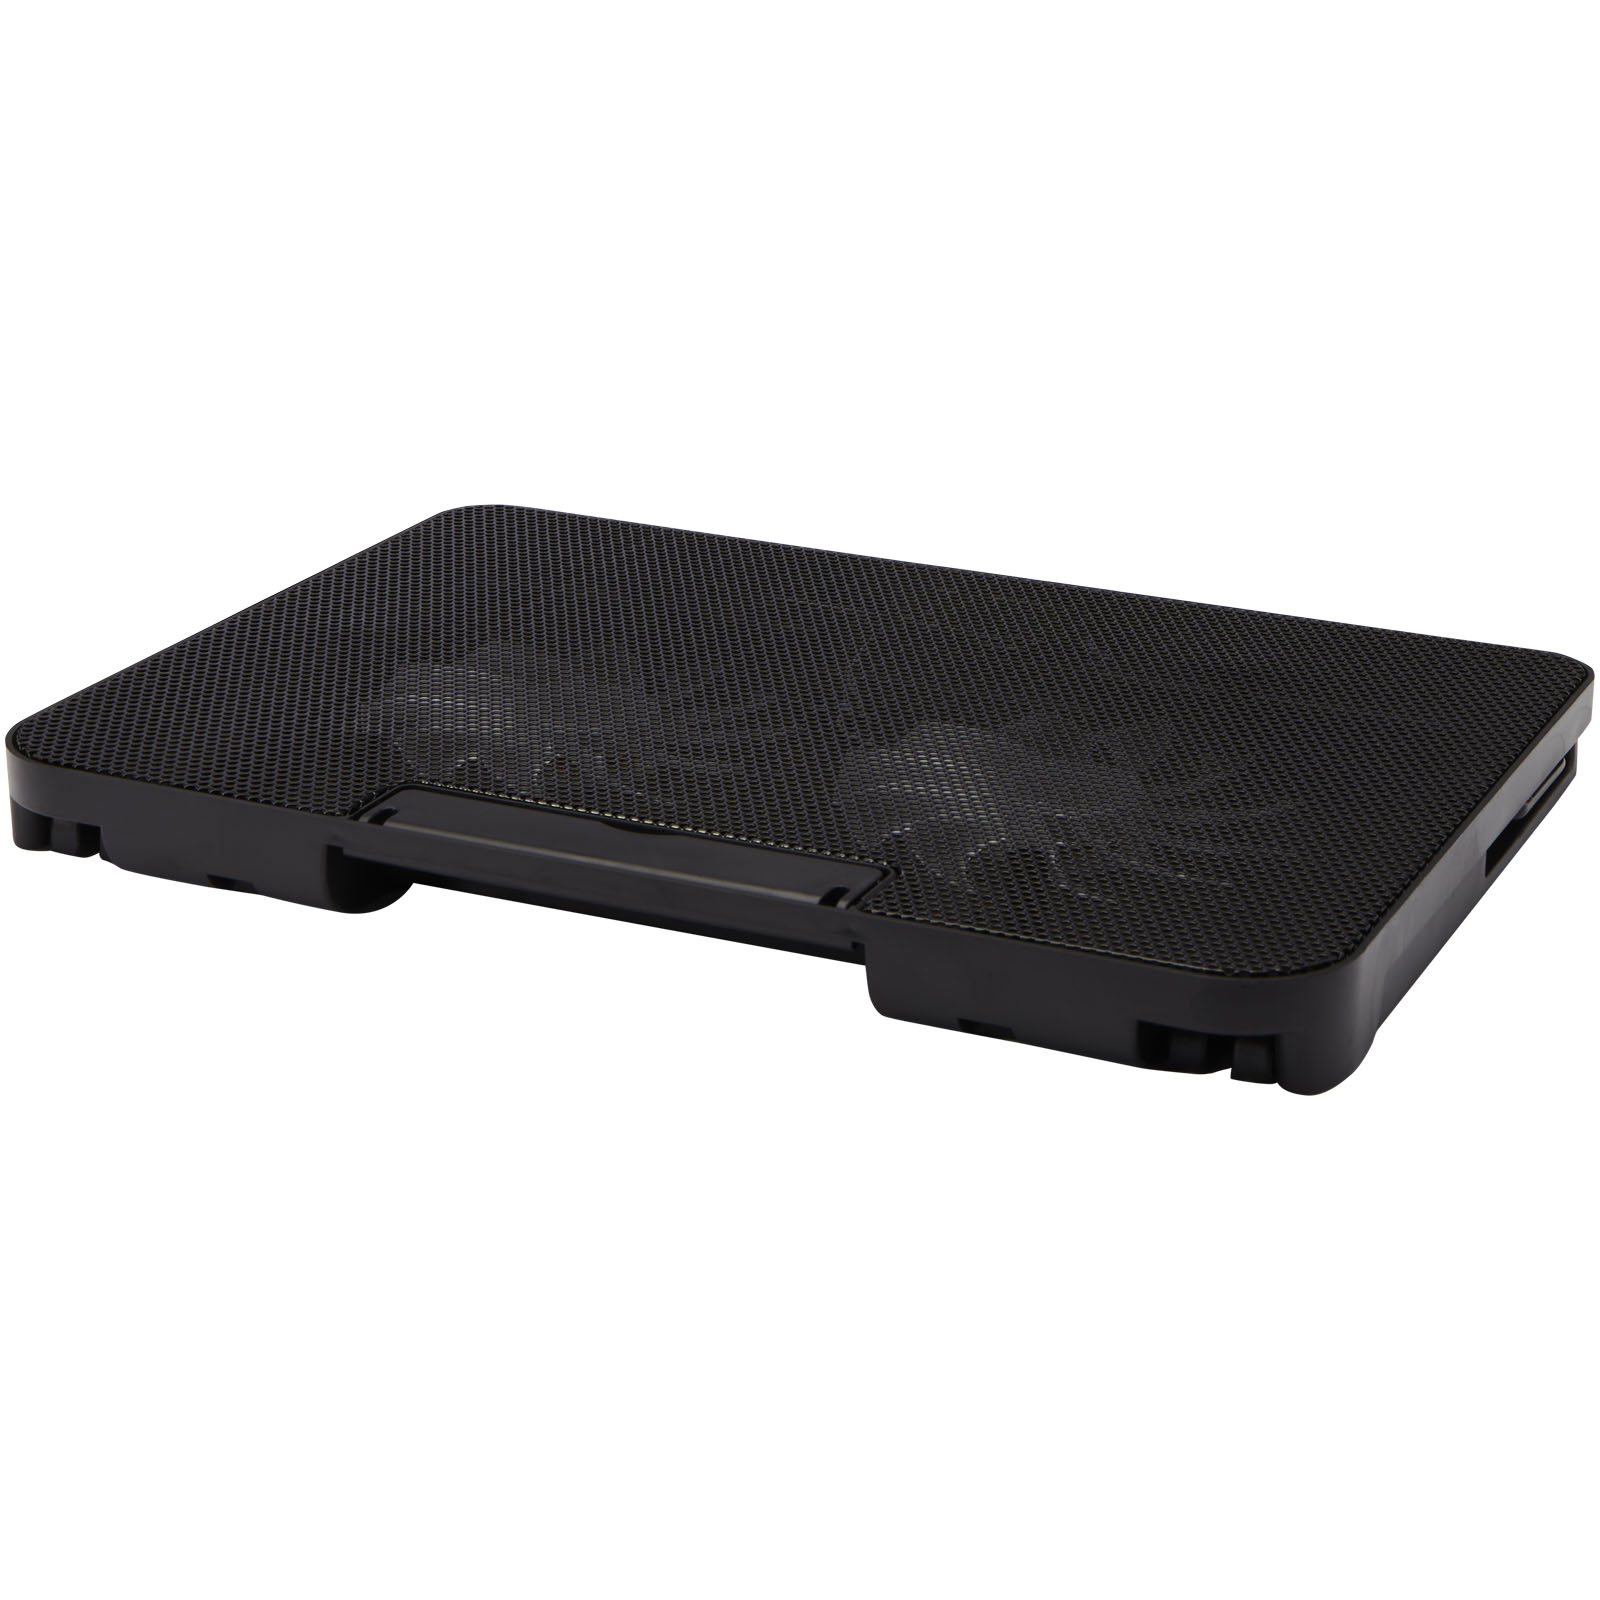 Advertising Computer Accessories - Gleam gaming laptop cooling stand - 5